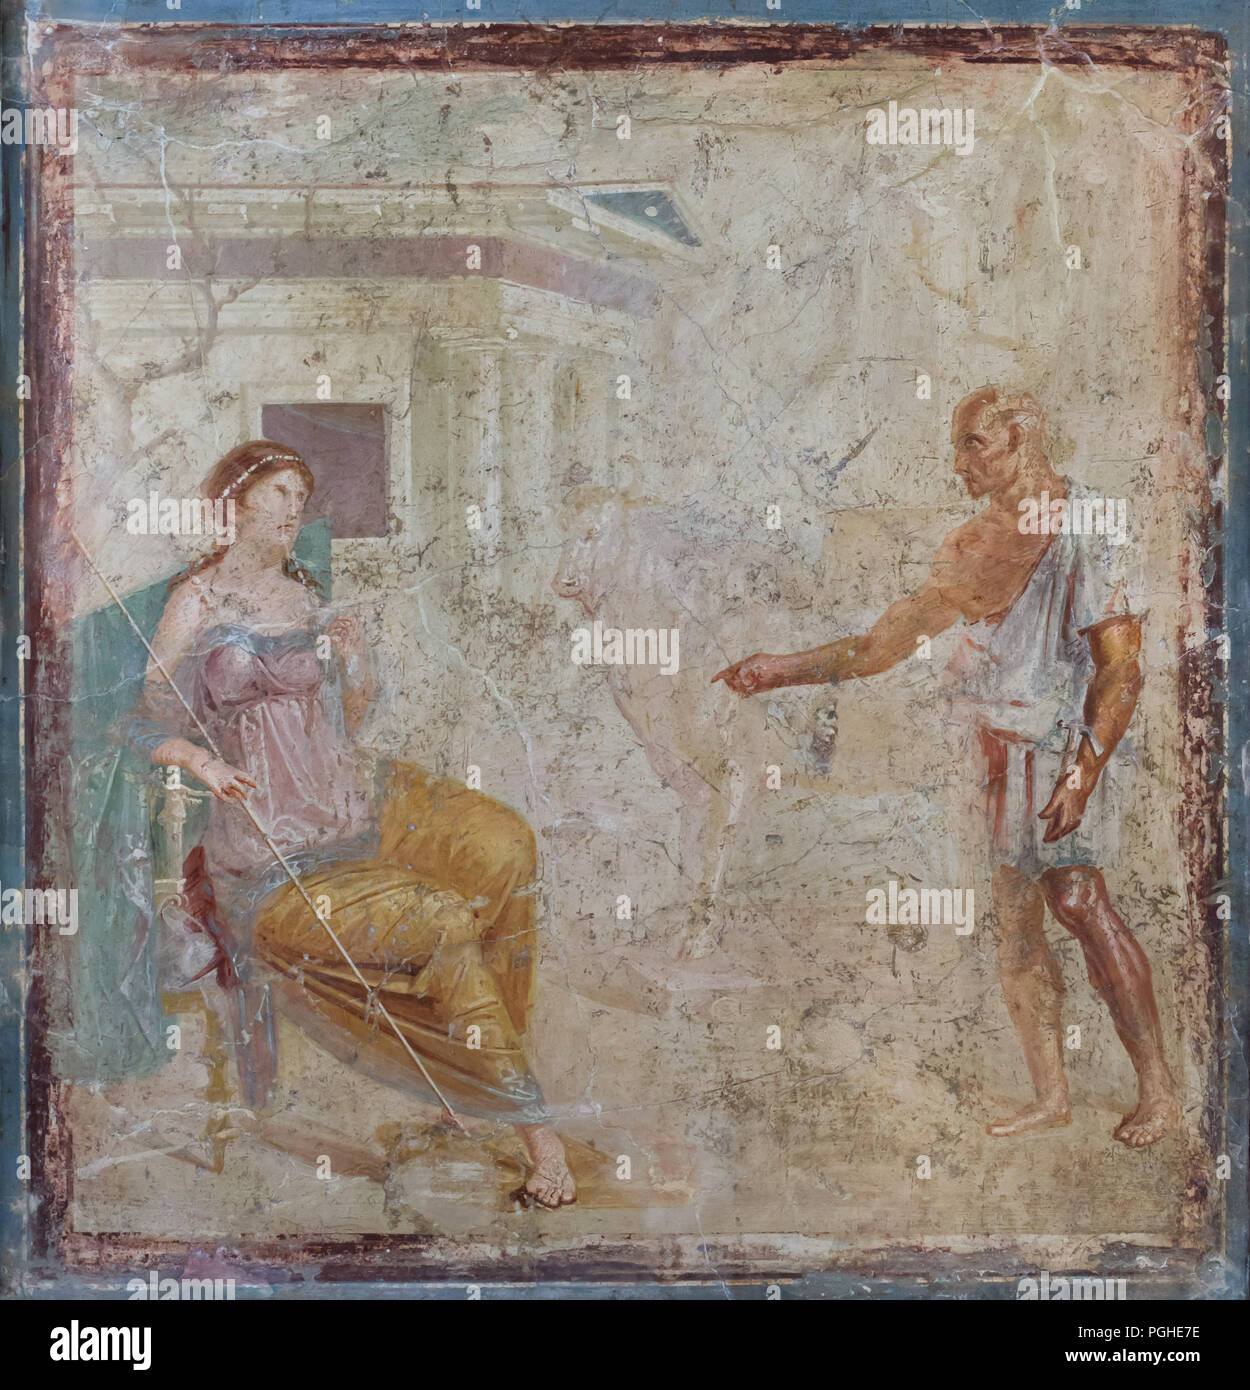 Daedalus presents the wooden cow to Pasiphaë. Roman fresco from the House of the Ancient Hunt (Casa della Caccia Antica) in Pompeii (1-79 AD), now on display in the National Archaeological Museum (Museo Archeologico Nazionale di Napoli) in Naples, Campania, Italy. The queen will be able to place herself inside it so that she can made with splendid bull that she has fallen in love with. Together they will produce the Minotaur. Stock Photo